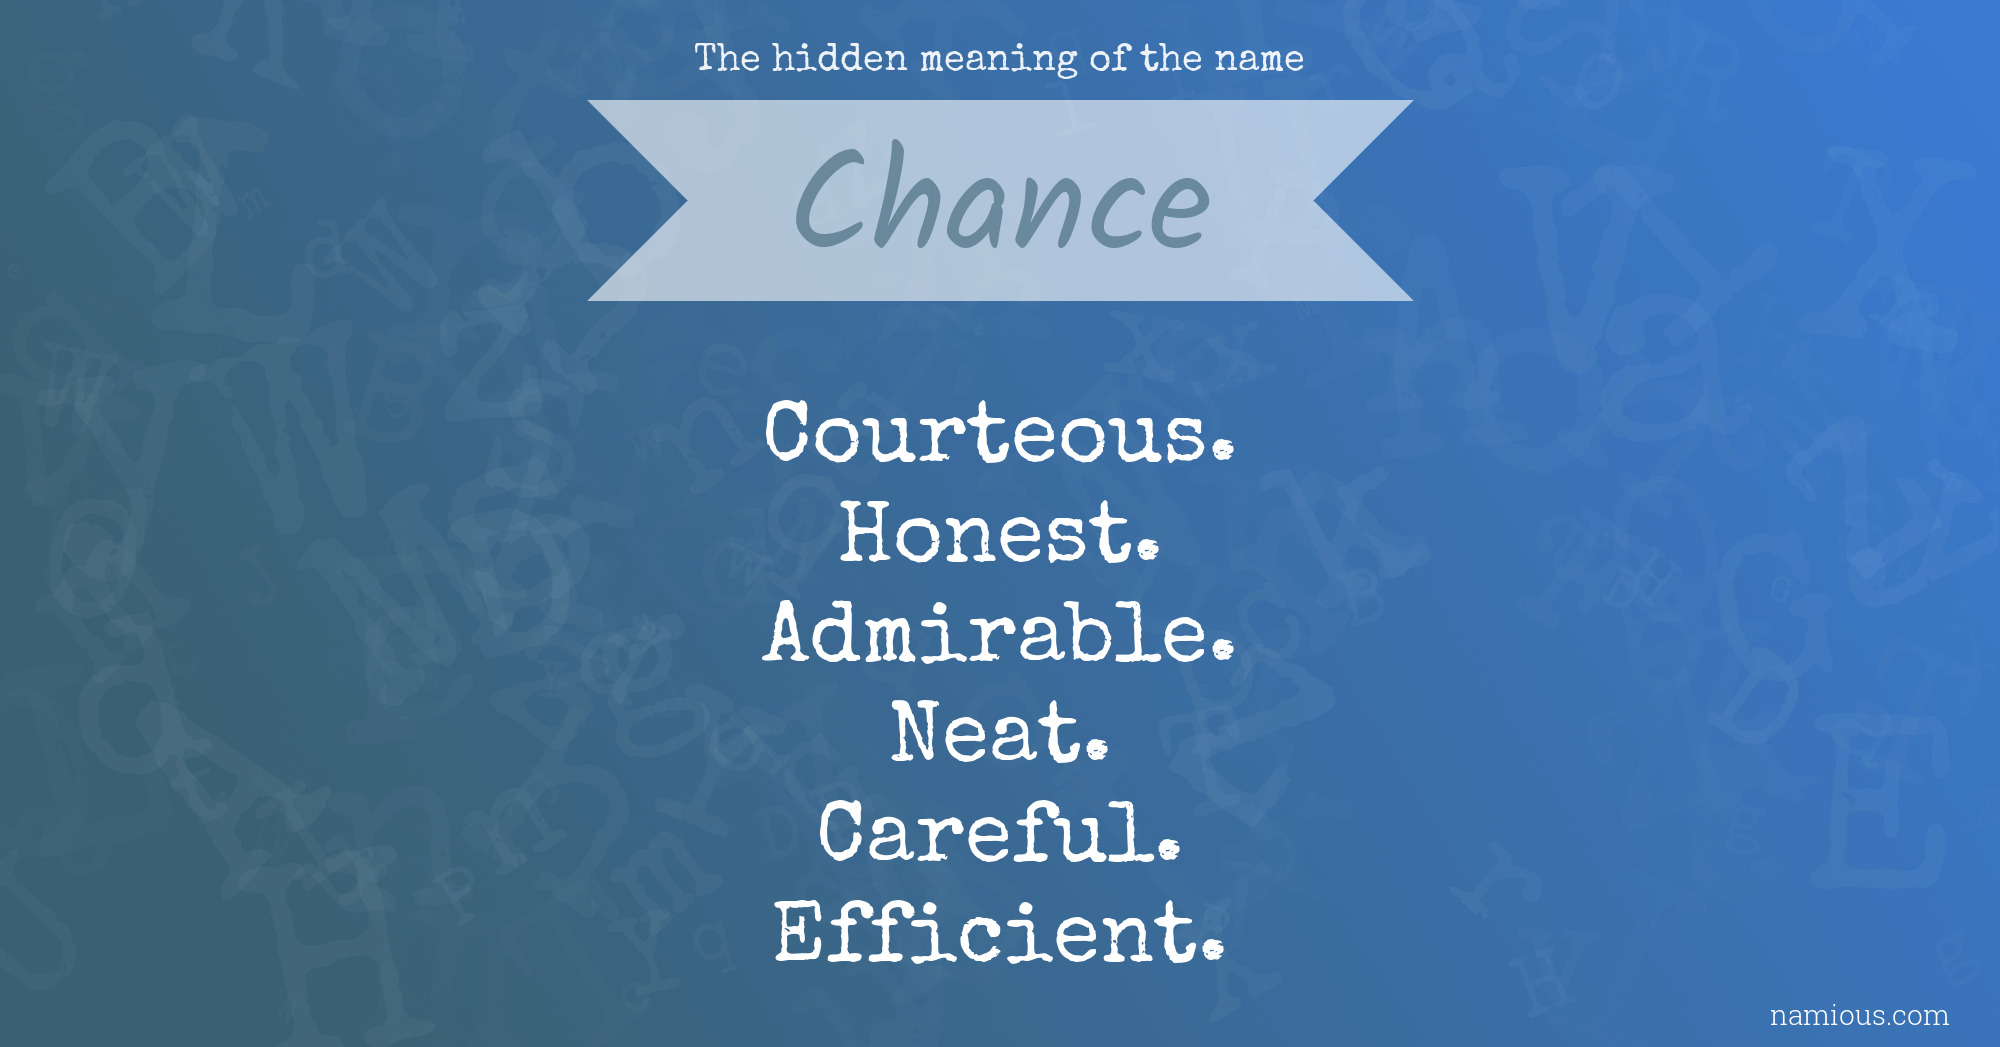 The hidden meaning of the name Chance